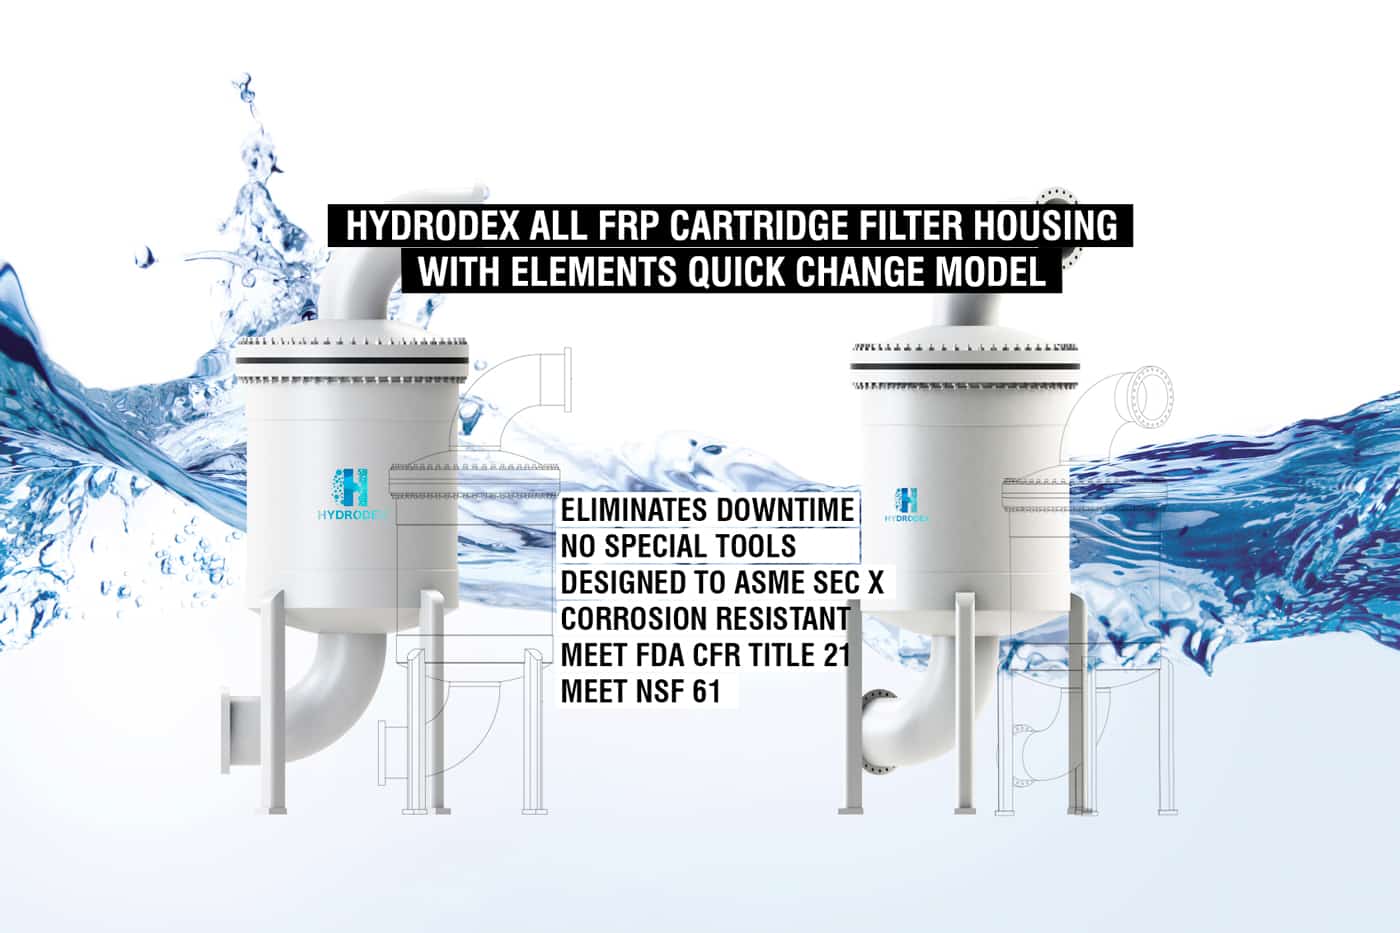 Hydrodex industrial FRP cartridge filter housi ng quick change element system